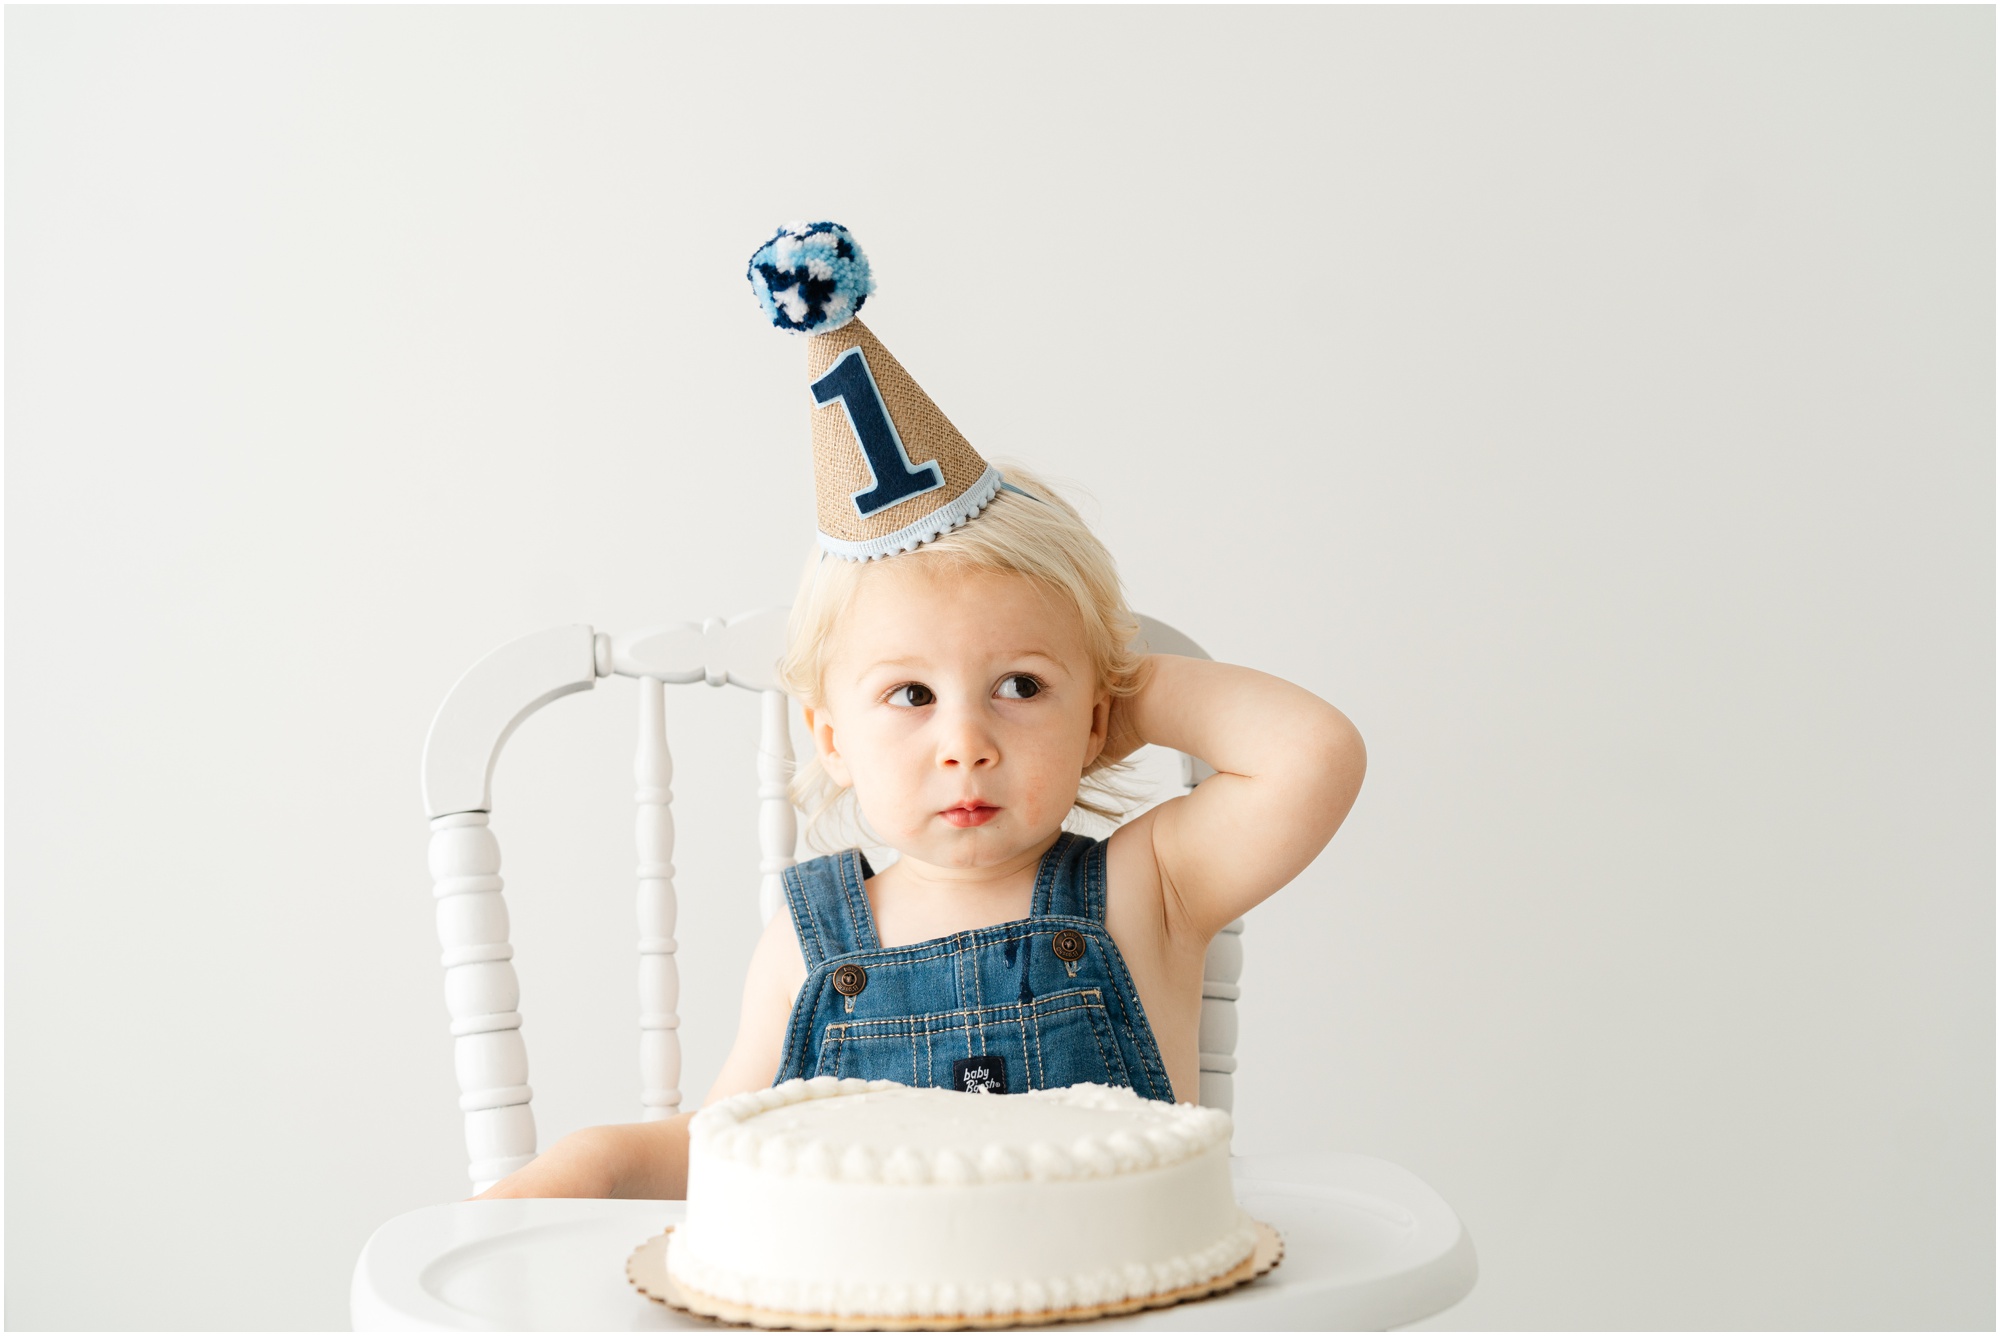 A young boy sits in a high chair with a cake in front of him and a birthday hate with a number one on it for a first birthday photo session.